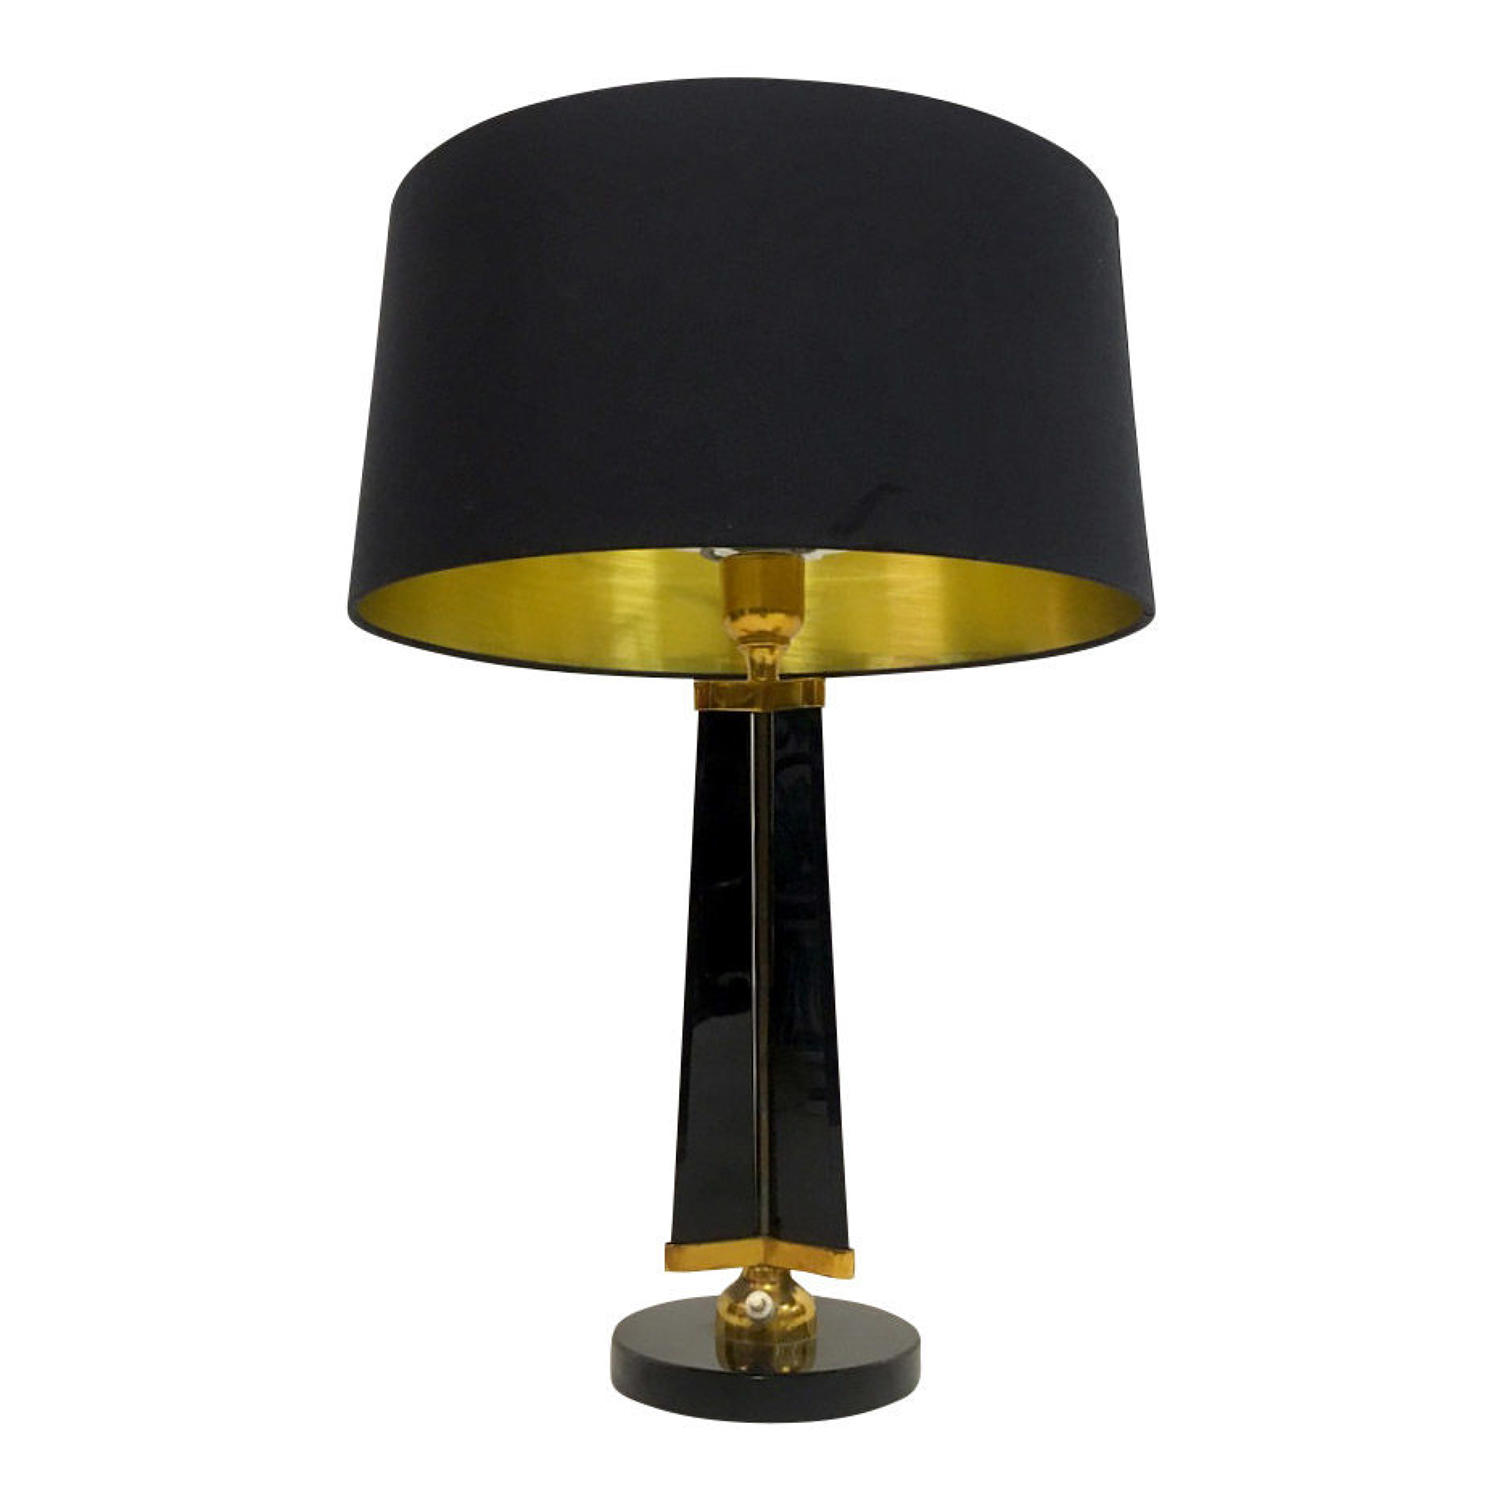 1950s black glass and brass table lamp possibly by Stilnovo